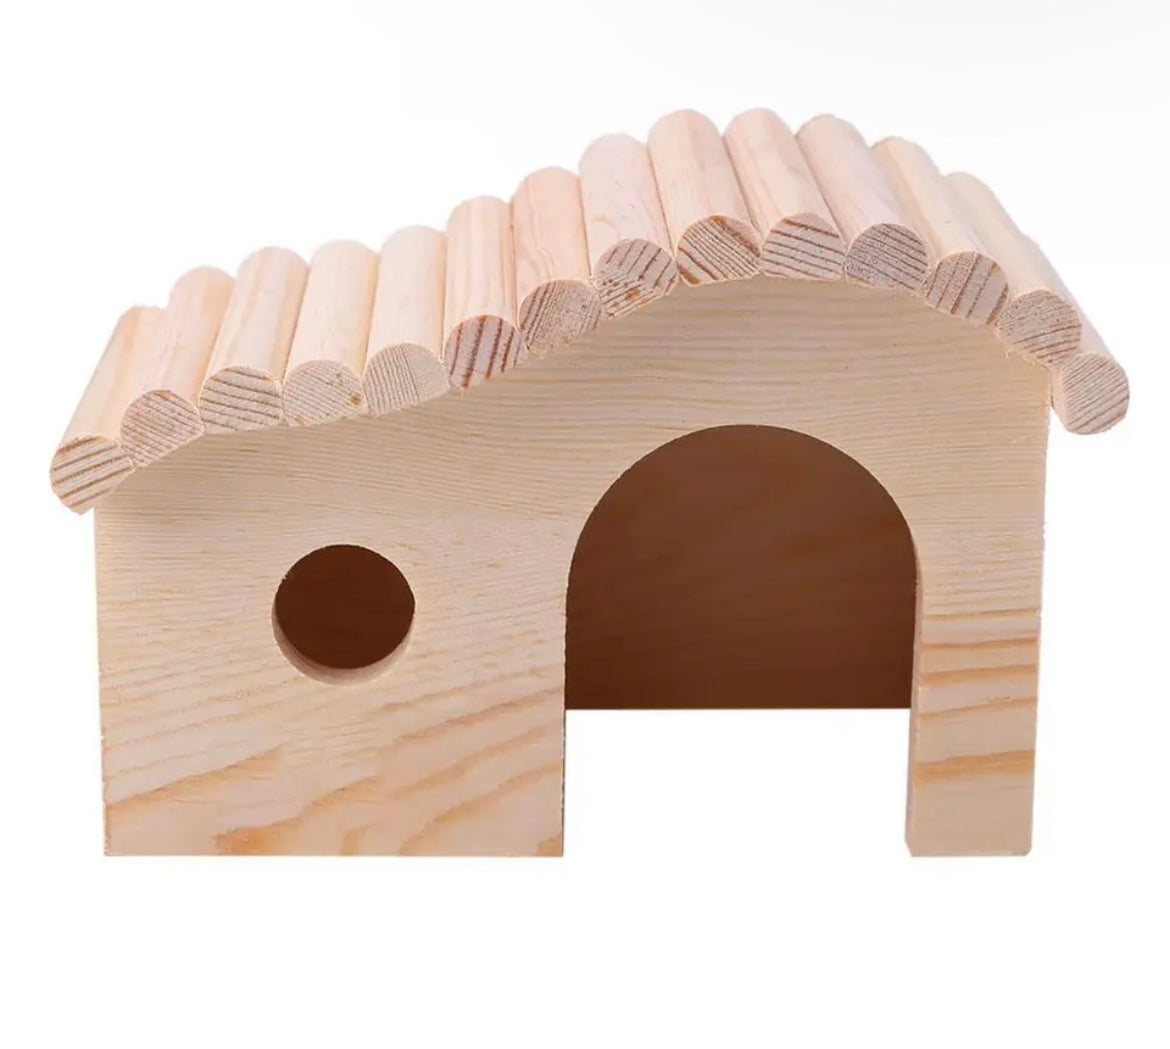 Small Animal Wooden House